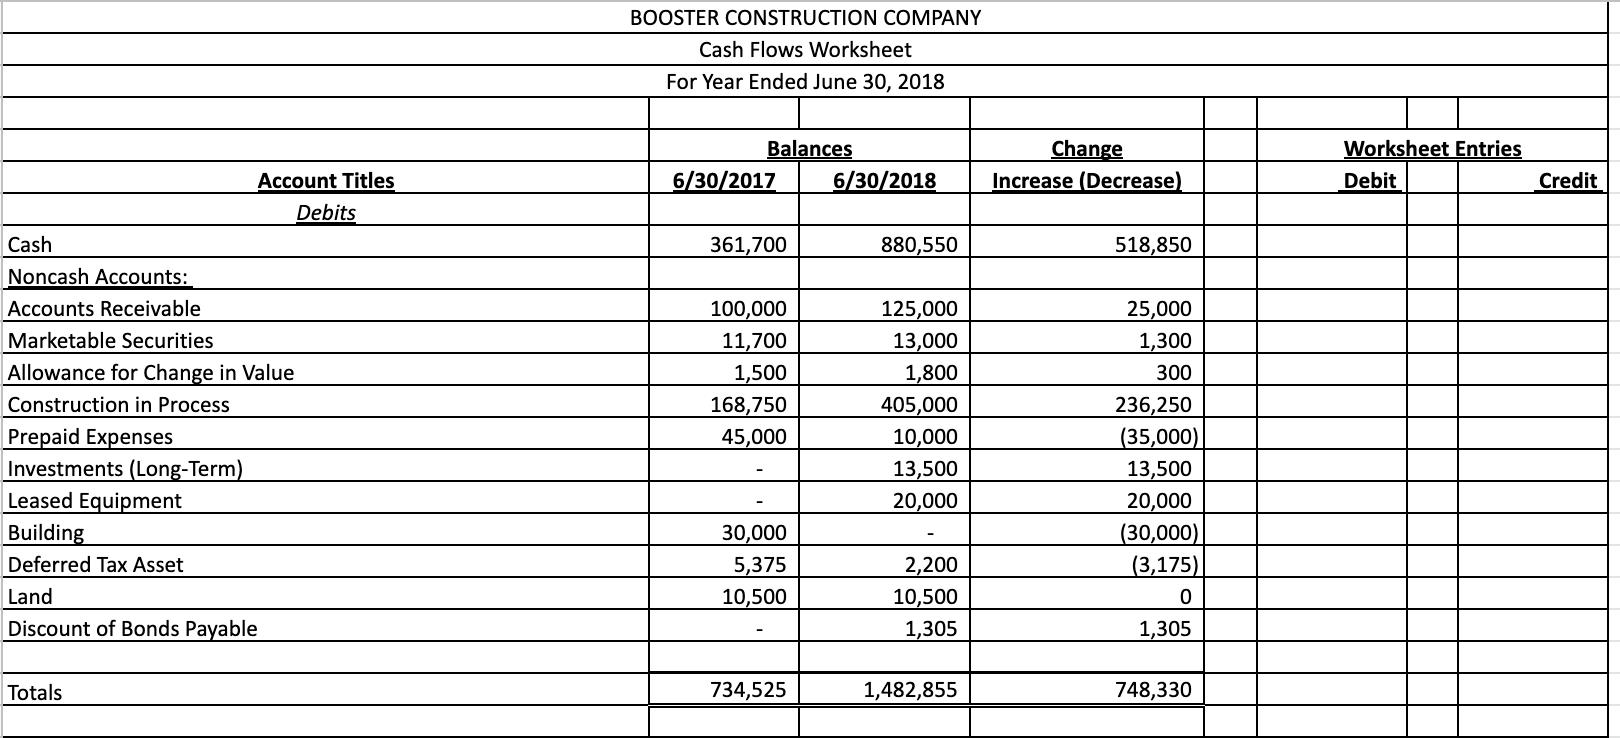 BOOSTER CONSTRUCTION COMPANY Cash Flows Worksheet For Year Ended June 30, 2018 Balances 6/30/2017 6/30/2018 Change Increase (